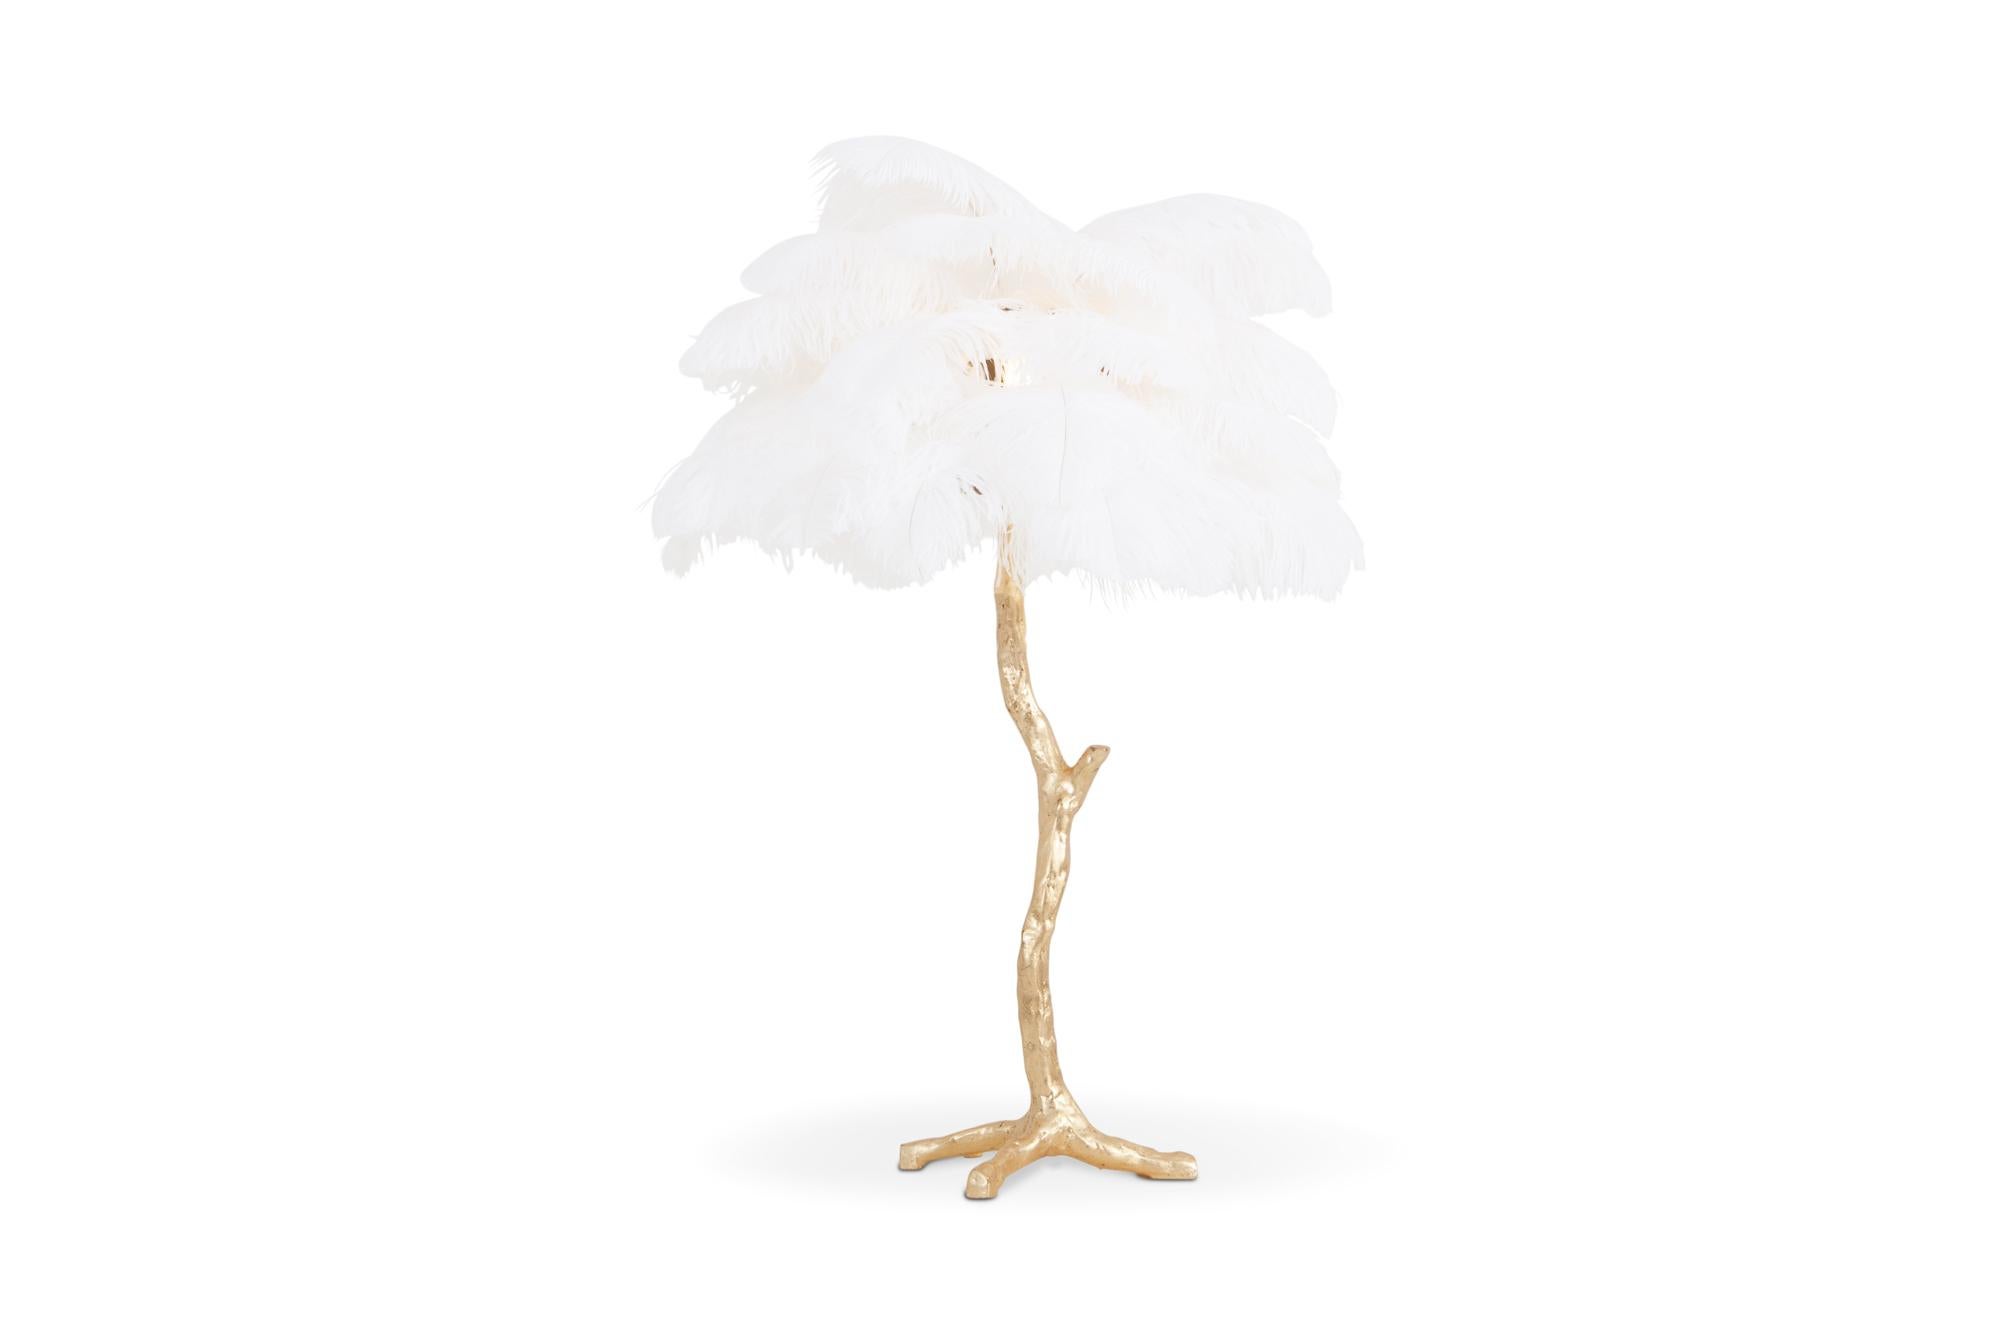 Contemporary Hollywood Regency lamp with golden resin stem and white colored ostrich feathers

Decorative luxury piece that fits well in an eclectic Hollywood Regency inspired metropolitan interior

We can also offer the larger floor lamp model.